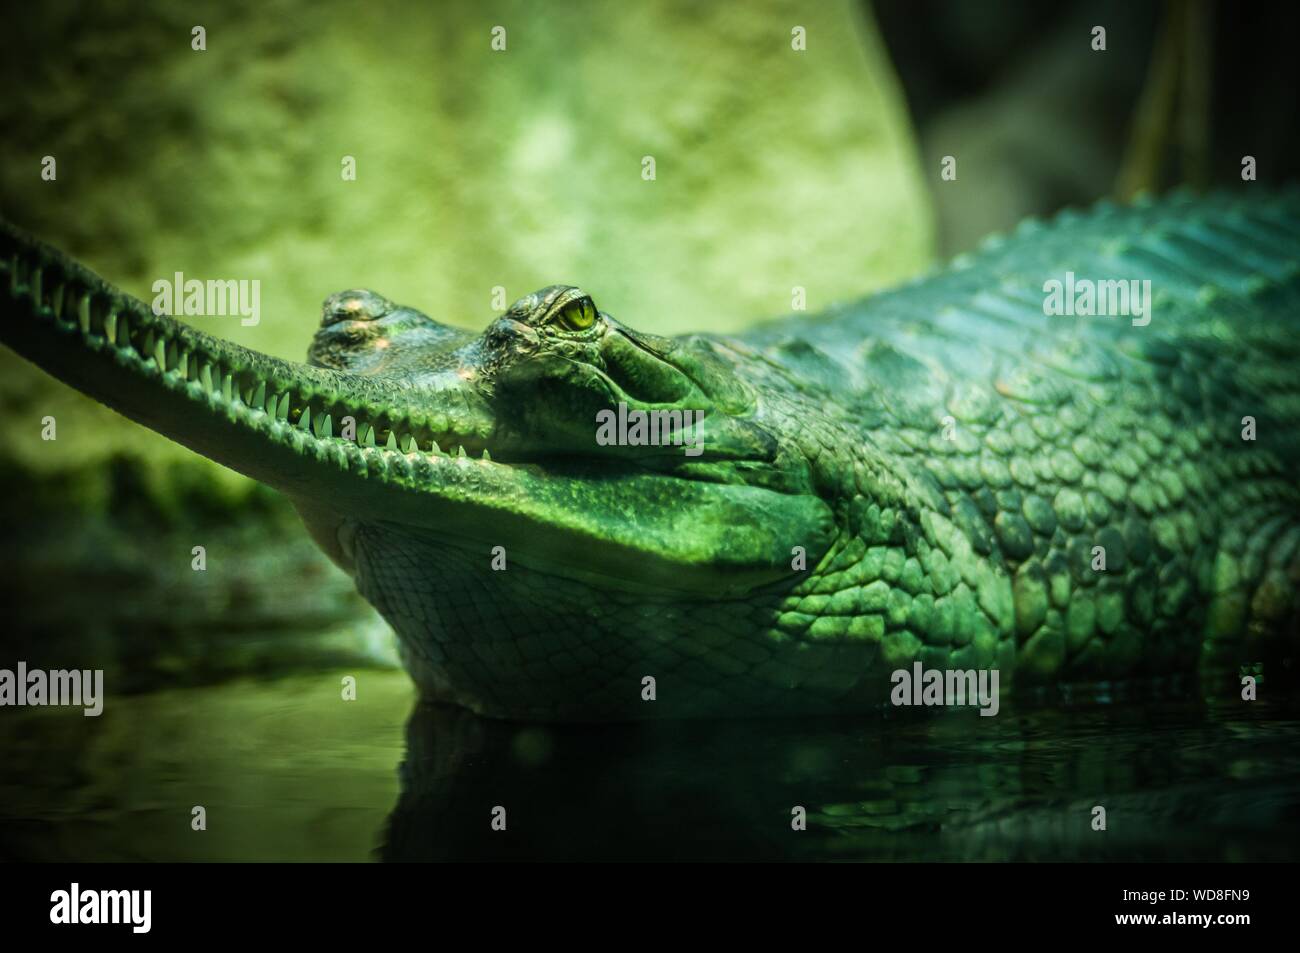 Closeup selective focus shot of a green alligator on the body of water Stock Photo